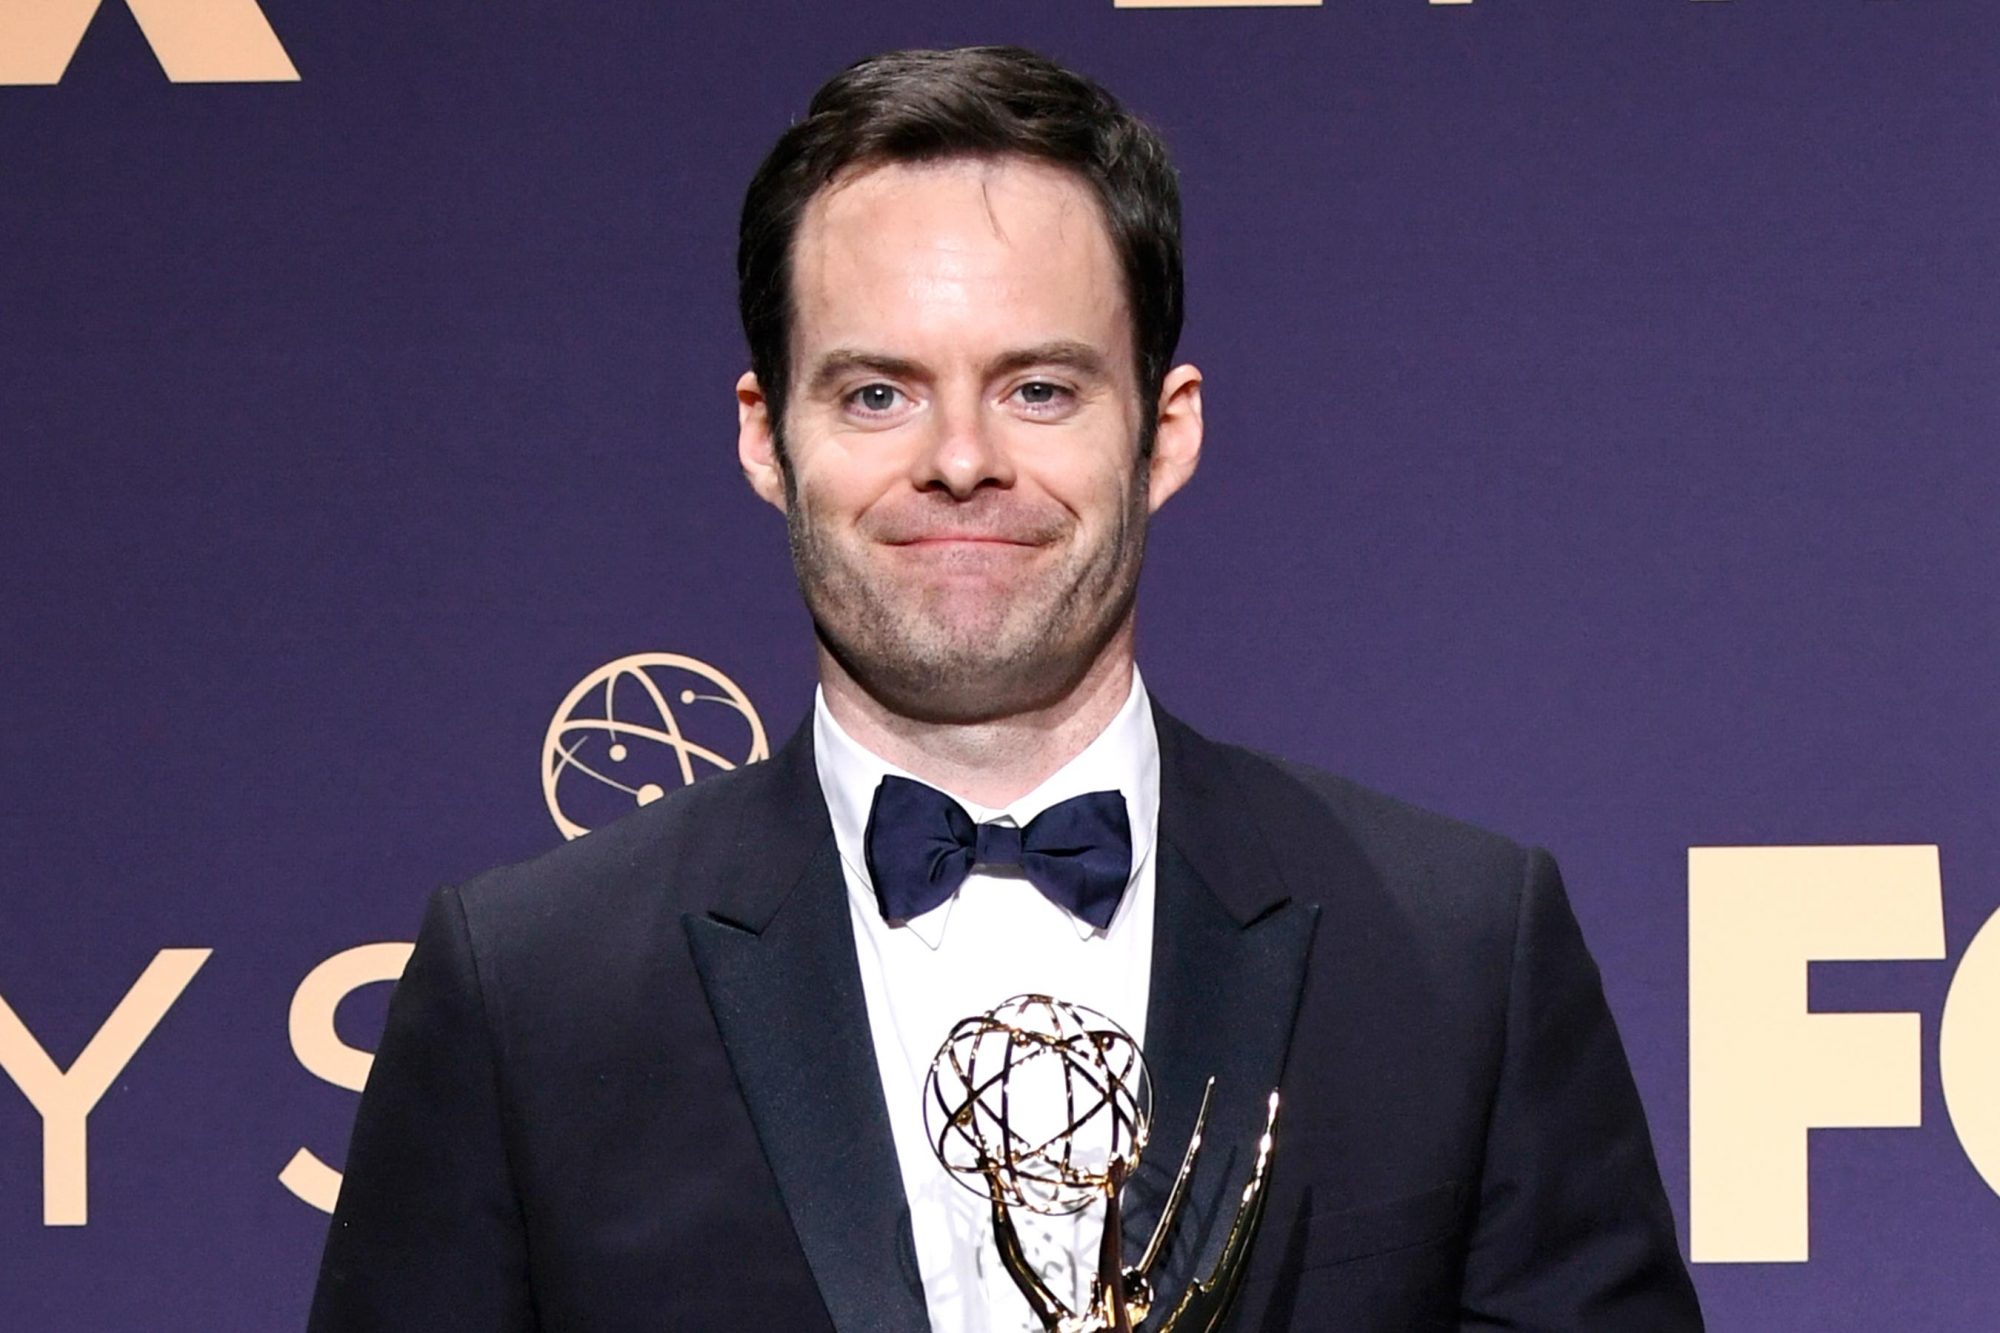 LOS ANGELES, CALIFORNIA - SEPTEMBER 22: Bill Hader poses with award for Outstanding Lead Actor in a Comedy Series in the press room during the 71st Emmy Awards at Microsoft Theater on September 22, 2019 in Los Angeles, California. (Photo by Frazer Harrison/Getty Images)